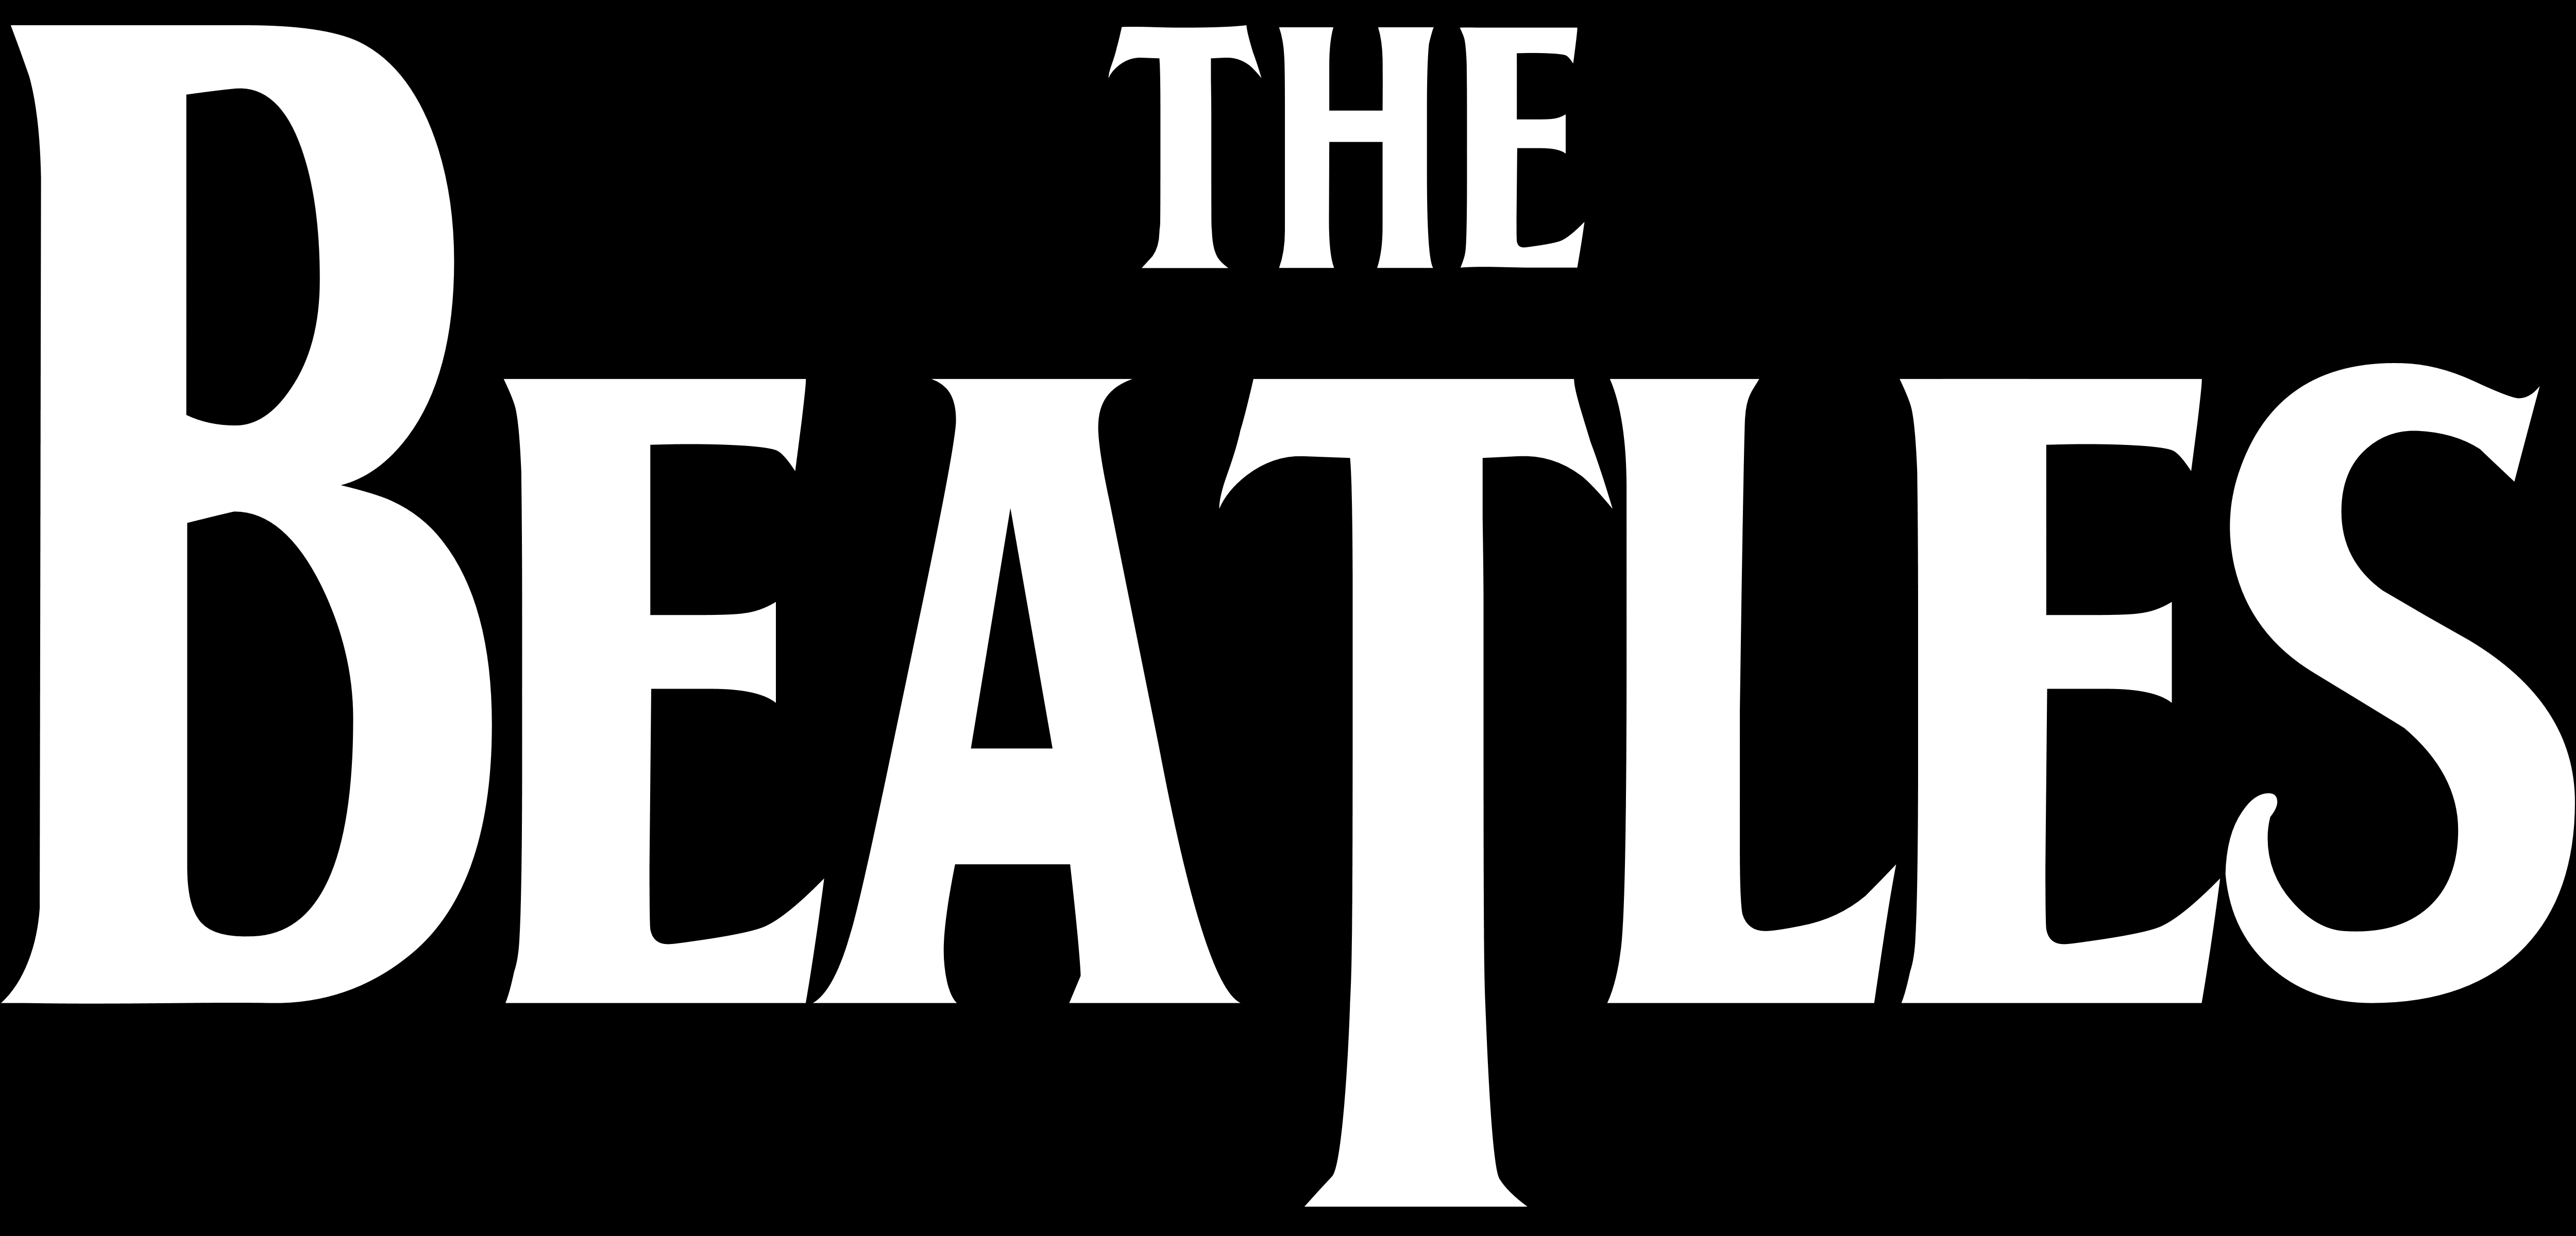 The Beatles Logo PNG - 180861